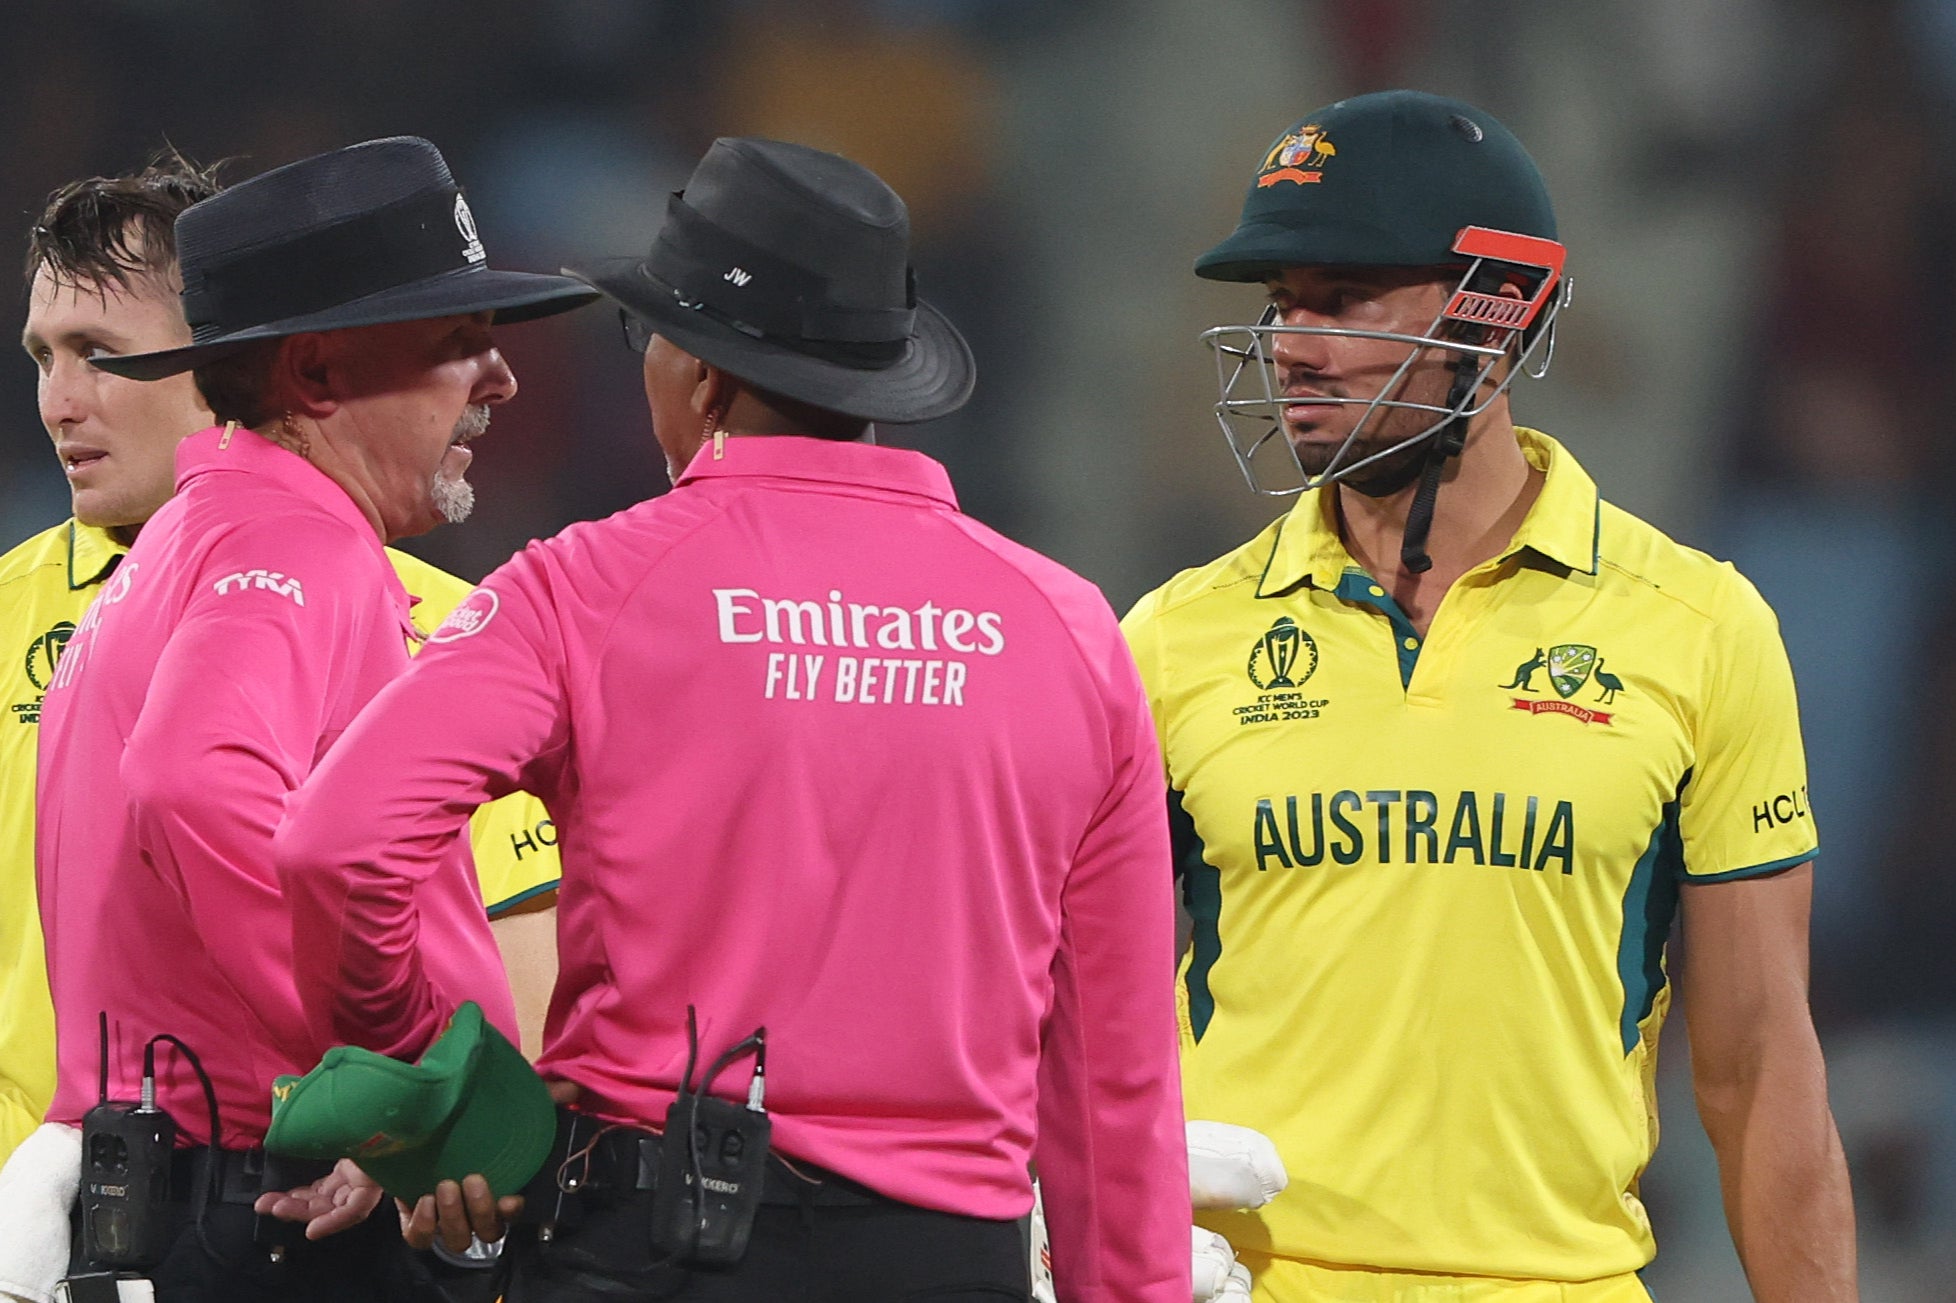 Australia's Marcus Stoinis did not want to leave the field after being given out controversially